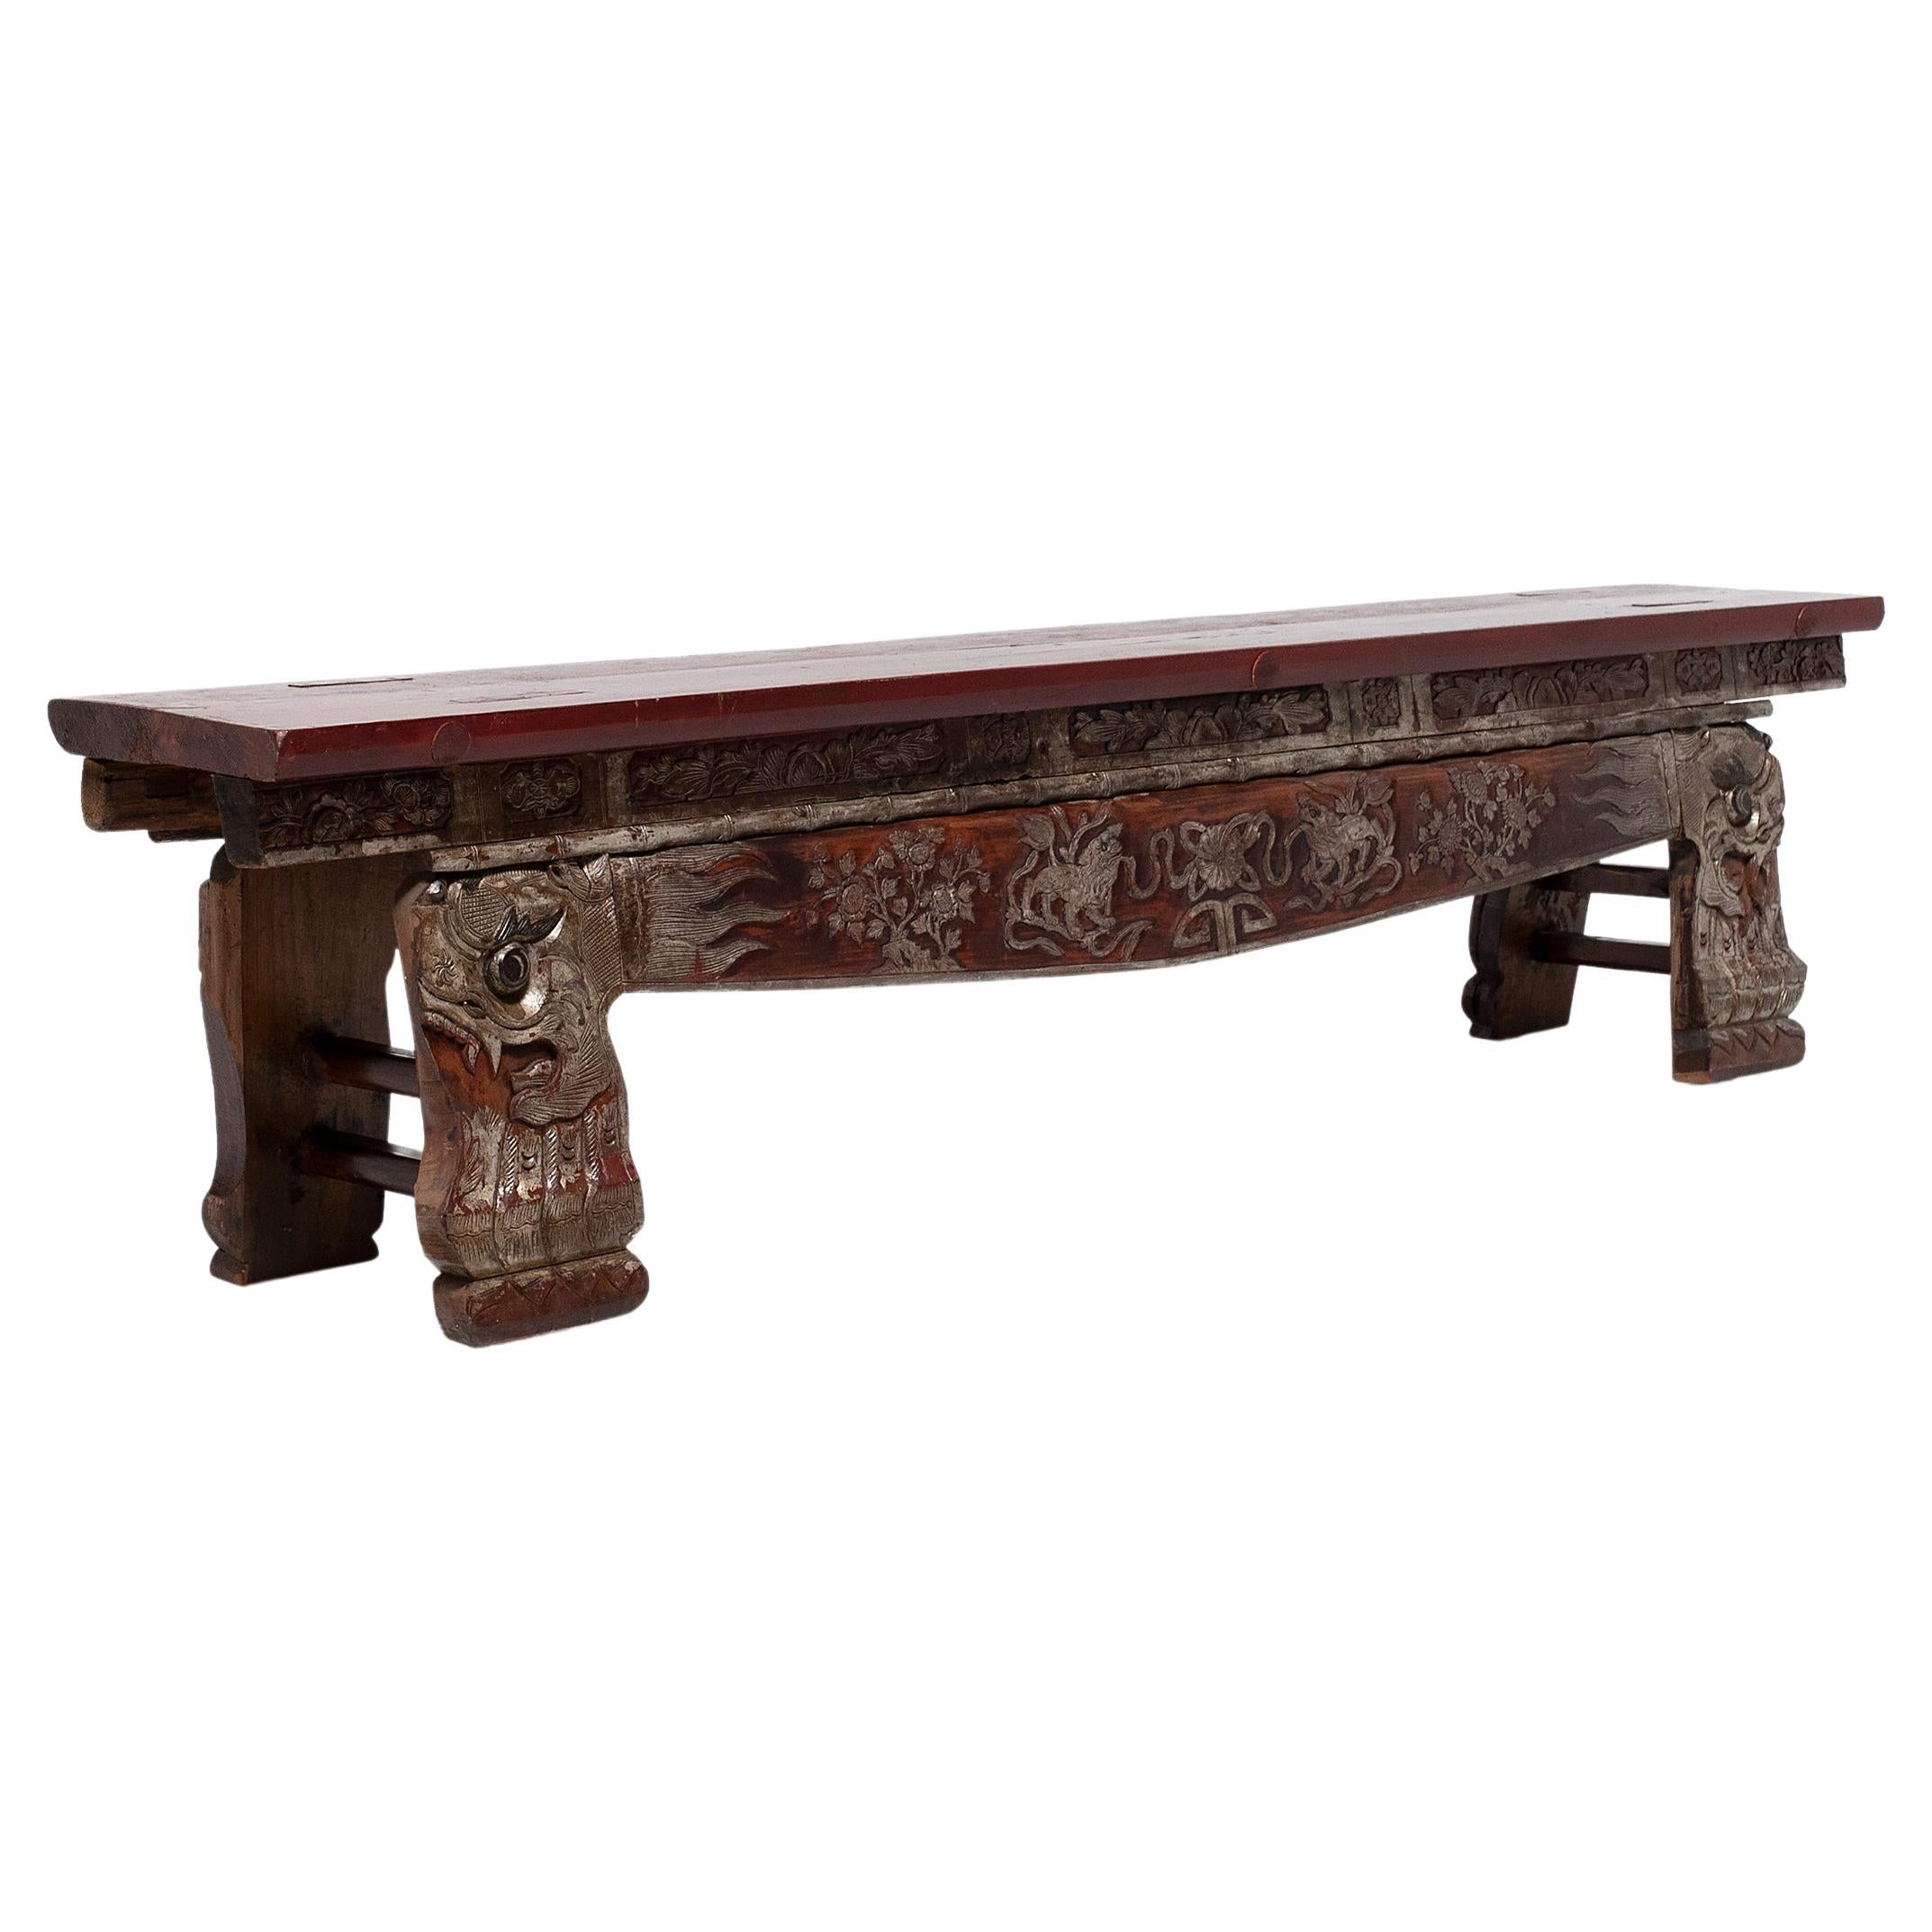 Chinese Lacquered Theater Bench with Dragon Carvings, c. 1850